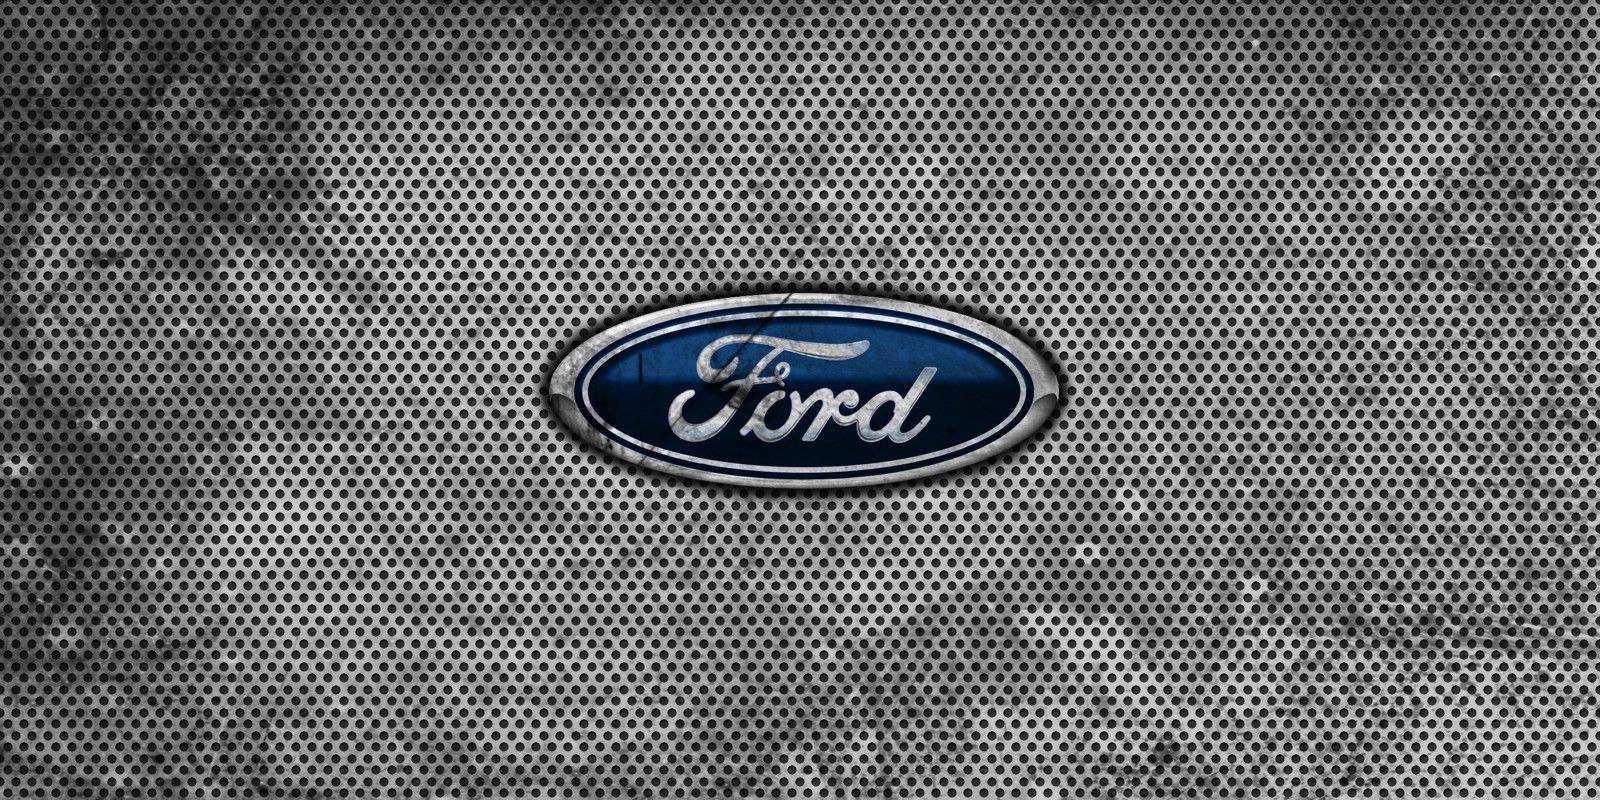 Ford Logo Wallpapers 1600x800